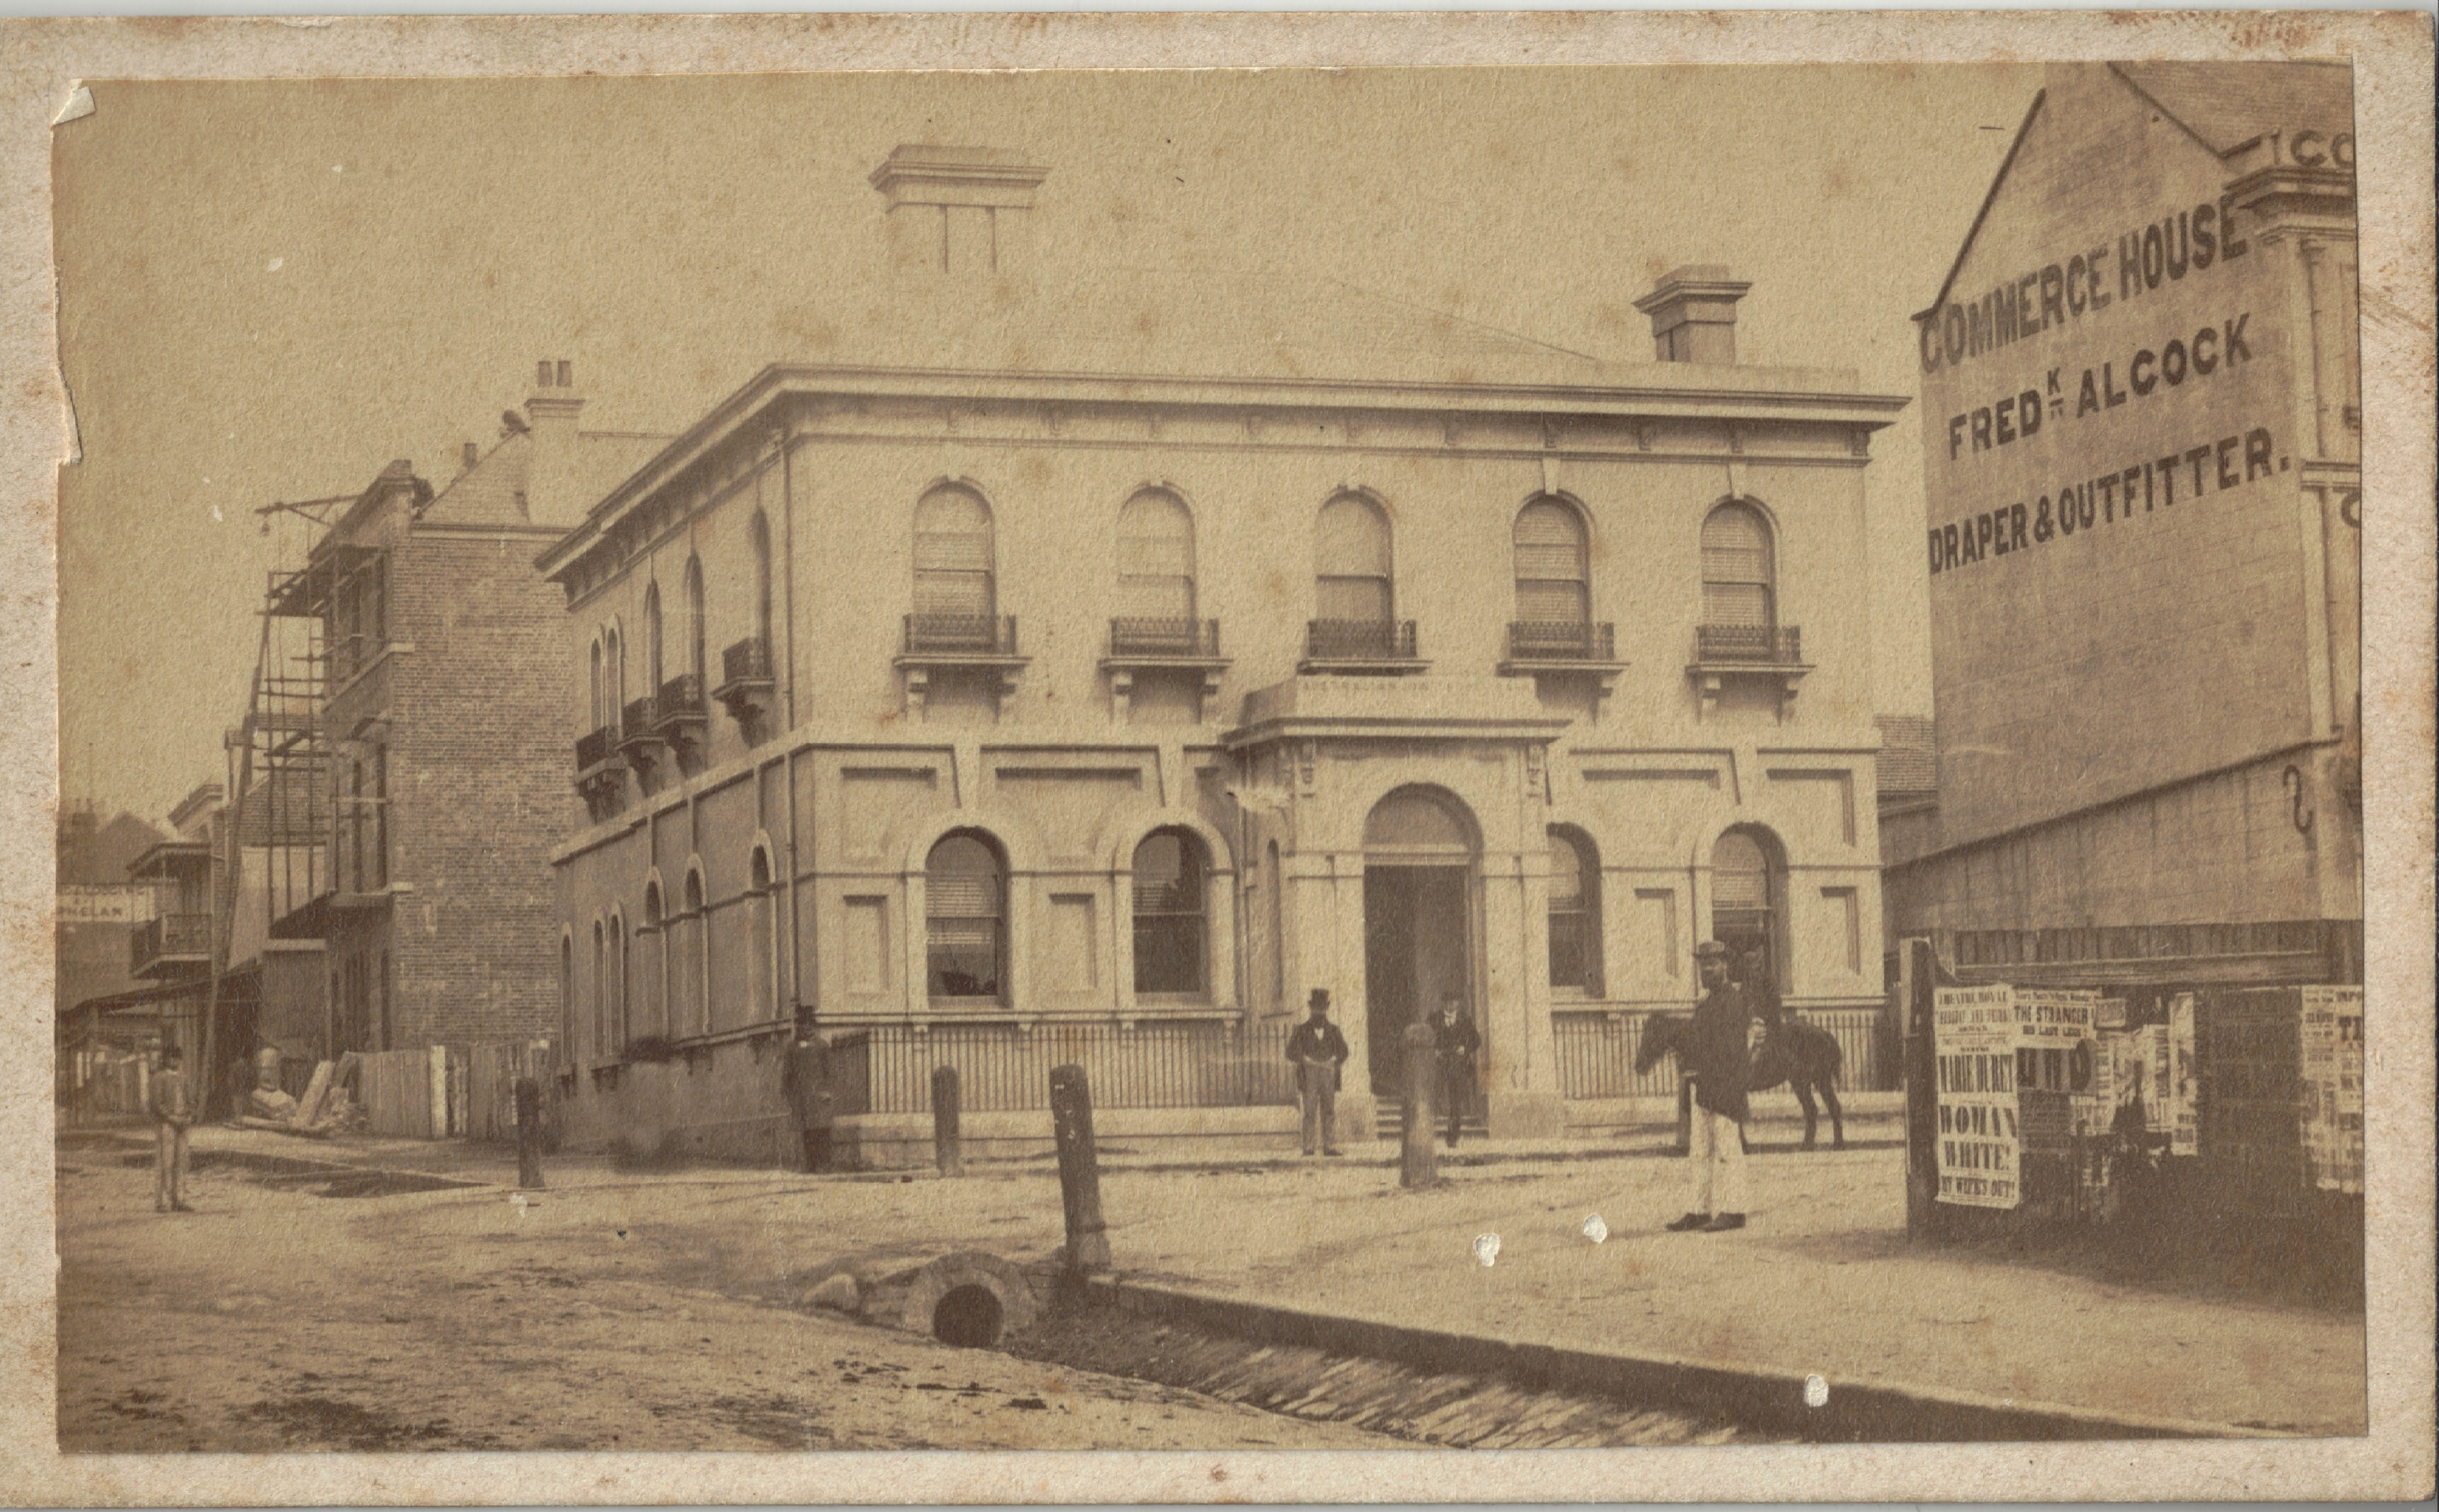 Australian Joint Stock Bank, (AJS) (12) Newcastle, circa 22 October 1870 - 1 December 1870 (Photo Credit: Digitised by Anne Glennie from Glennie Family Albums) Click for larger view